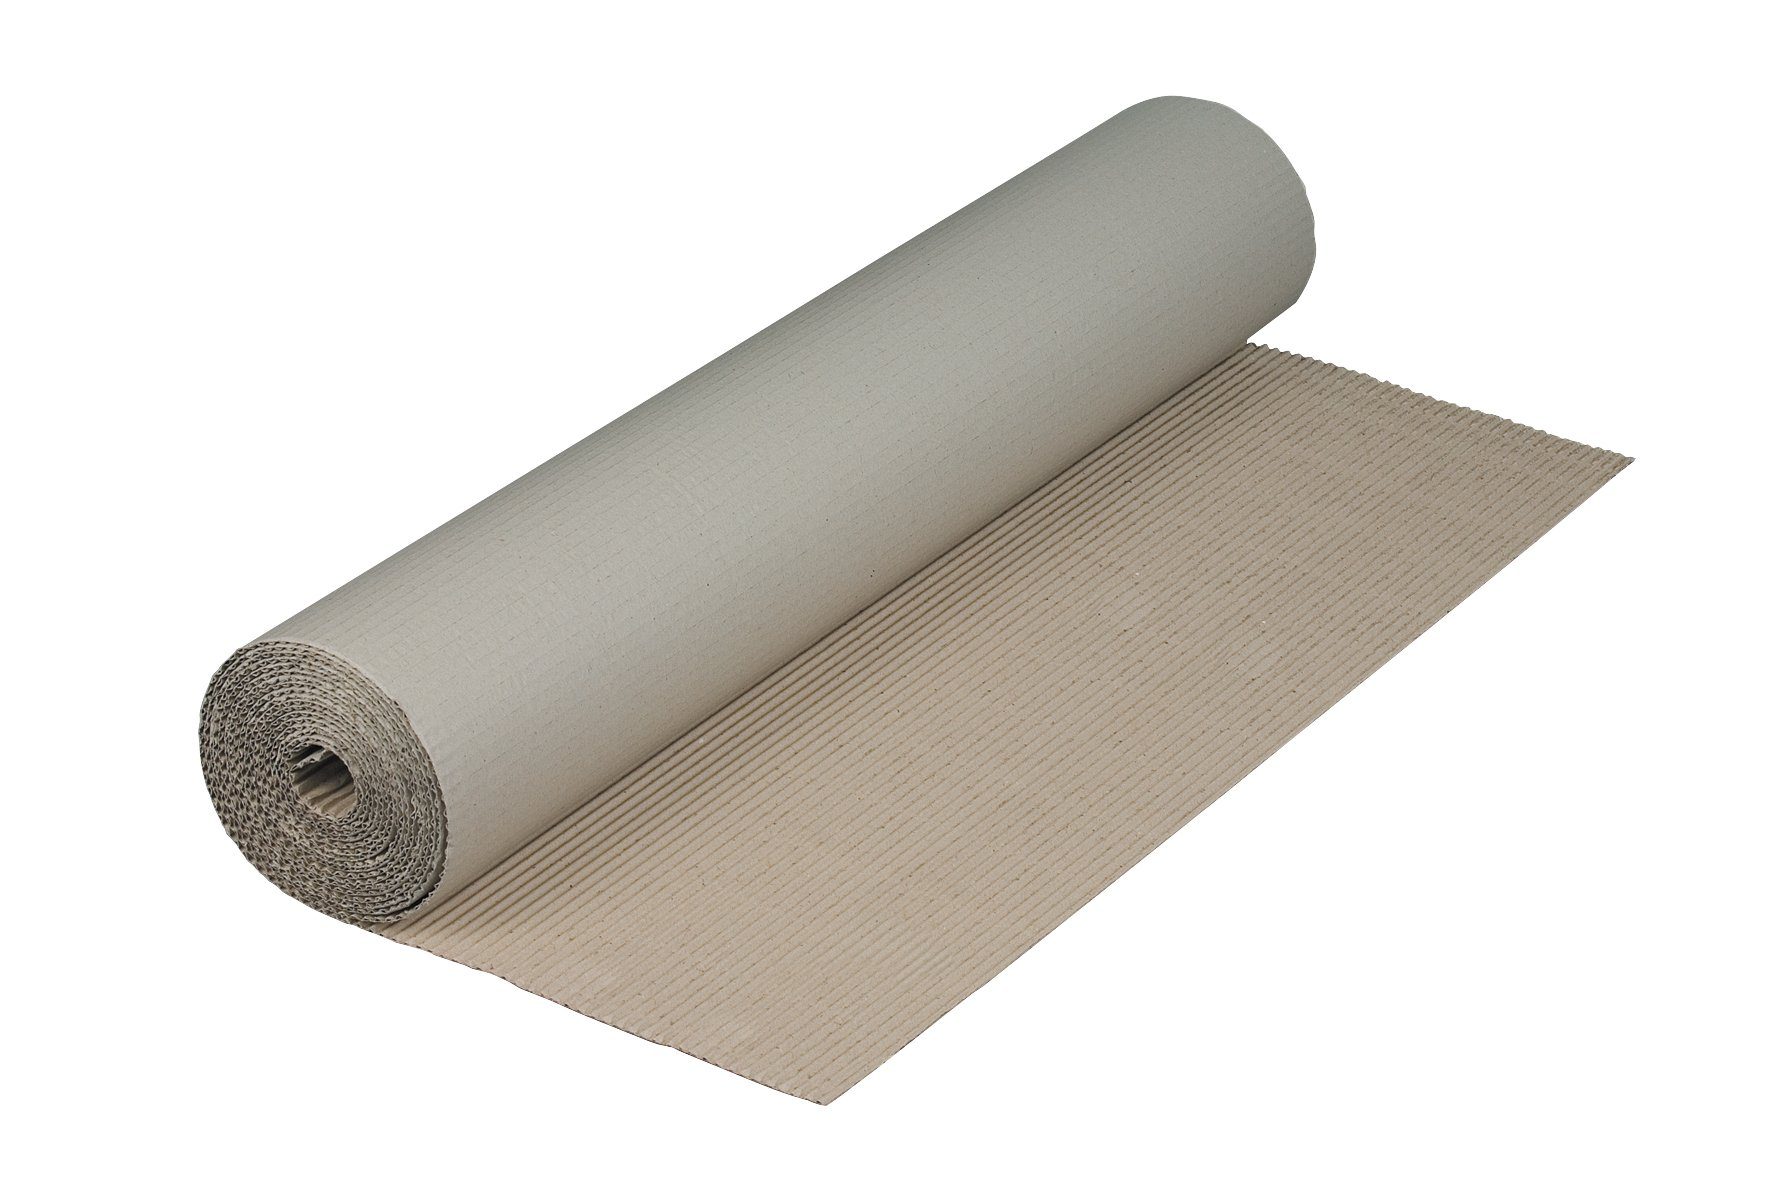 cm Packpapier 5 m ROLLEN-WELLPAPPE NIPS Polstermaterial, 70 x Recycling-Wellpappe